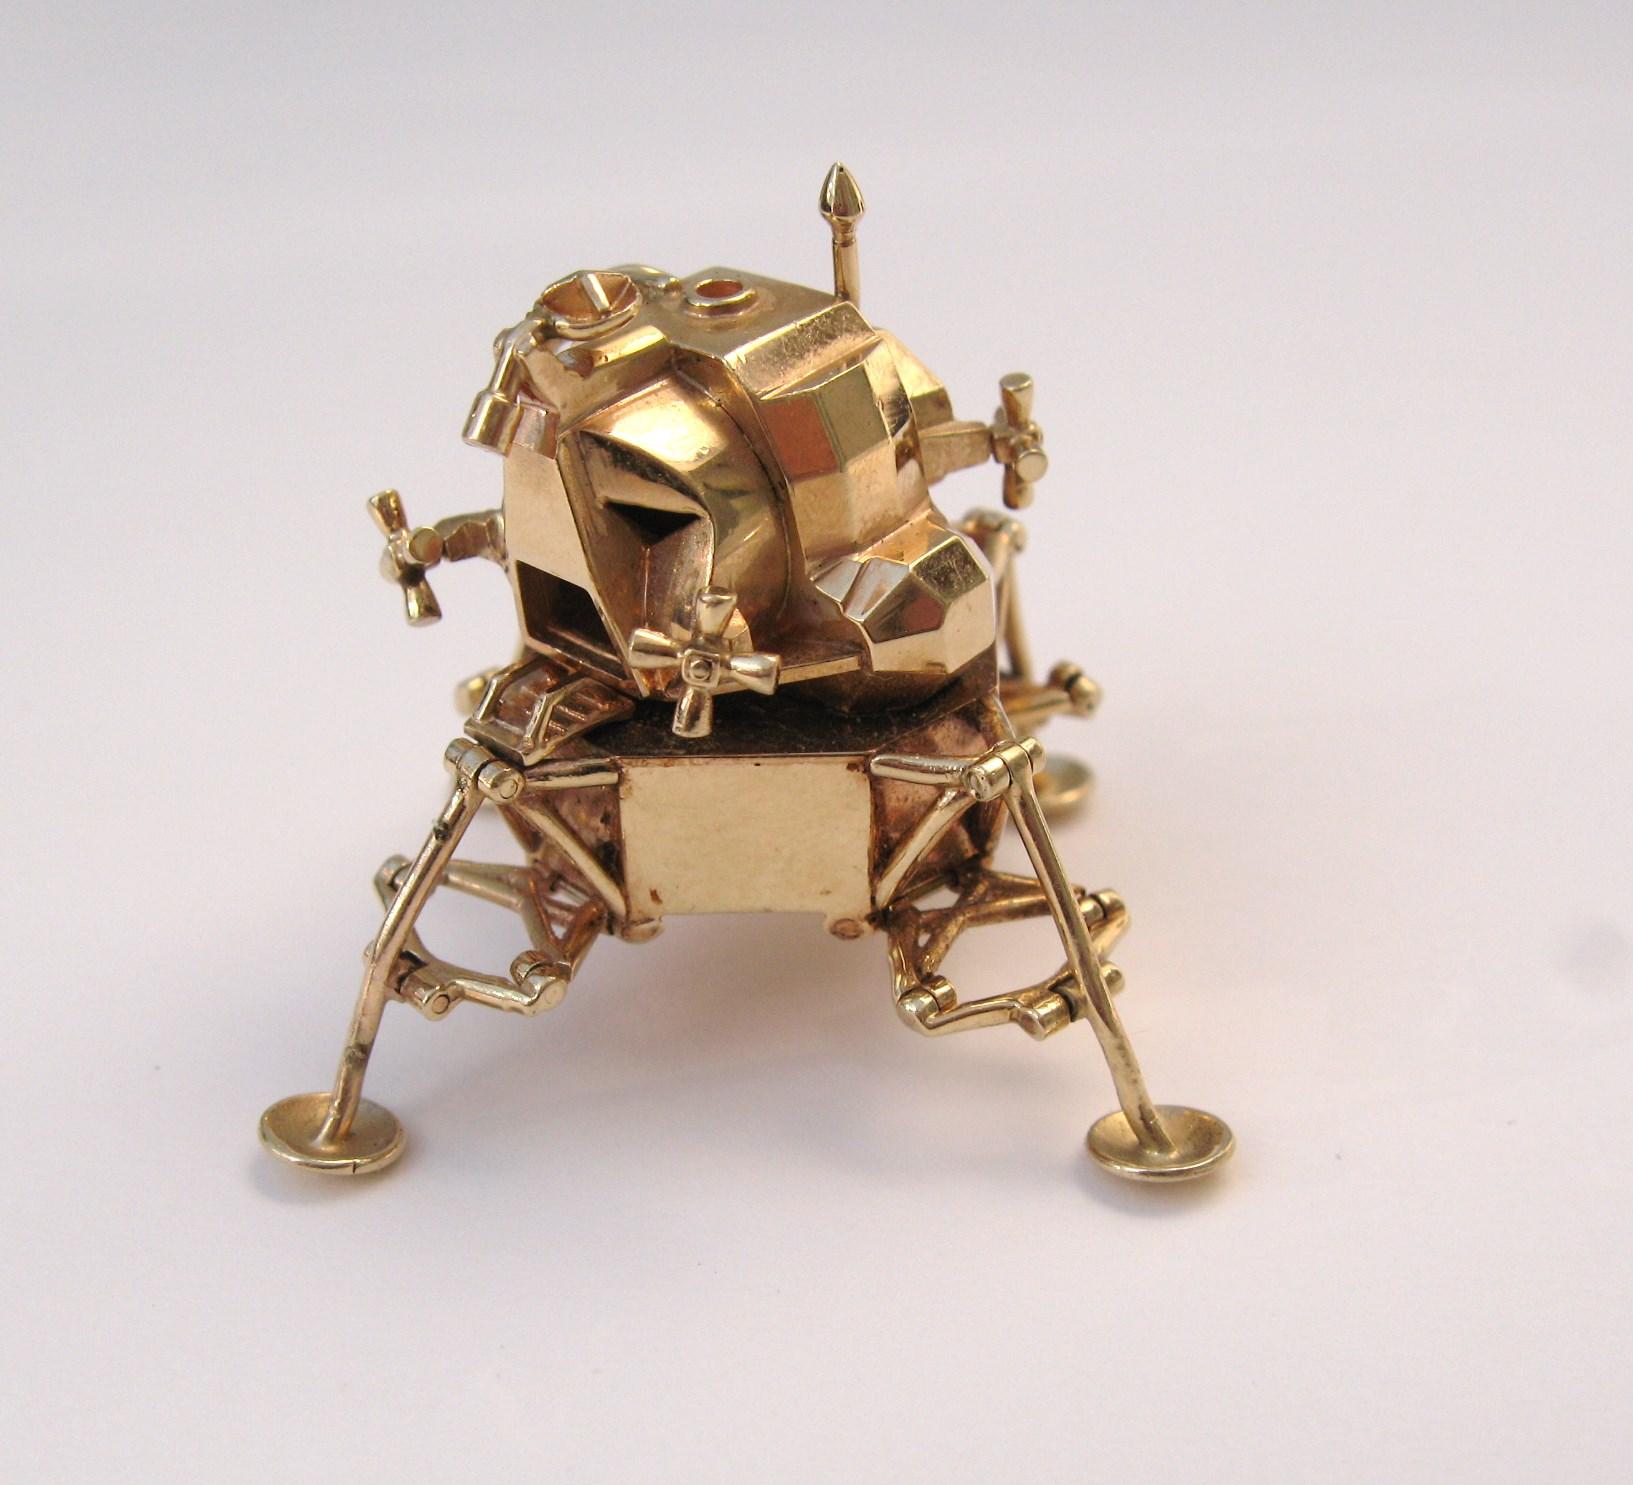 Now, this isn't something you see everyday! 14K Gold model of Apollo 11 articulated Lunar Module, a mini Apollo 11. 1969 Lunar Excursion Module. Measuring 1.5in x 1.5in. The feet of the module articulate out and fold back in. This is out of our